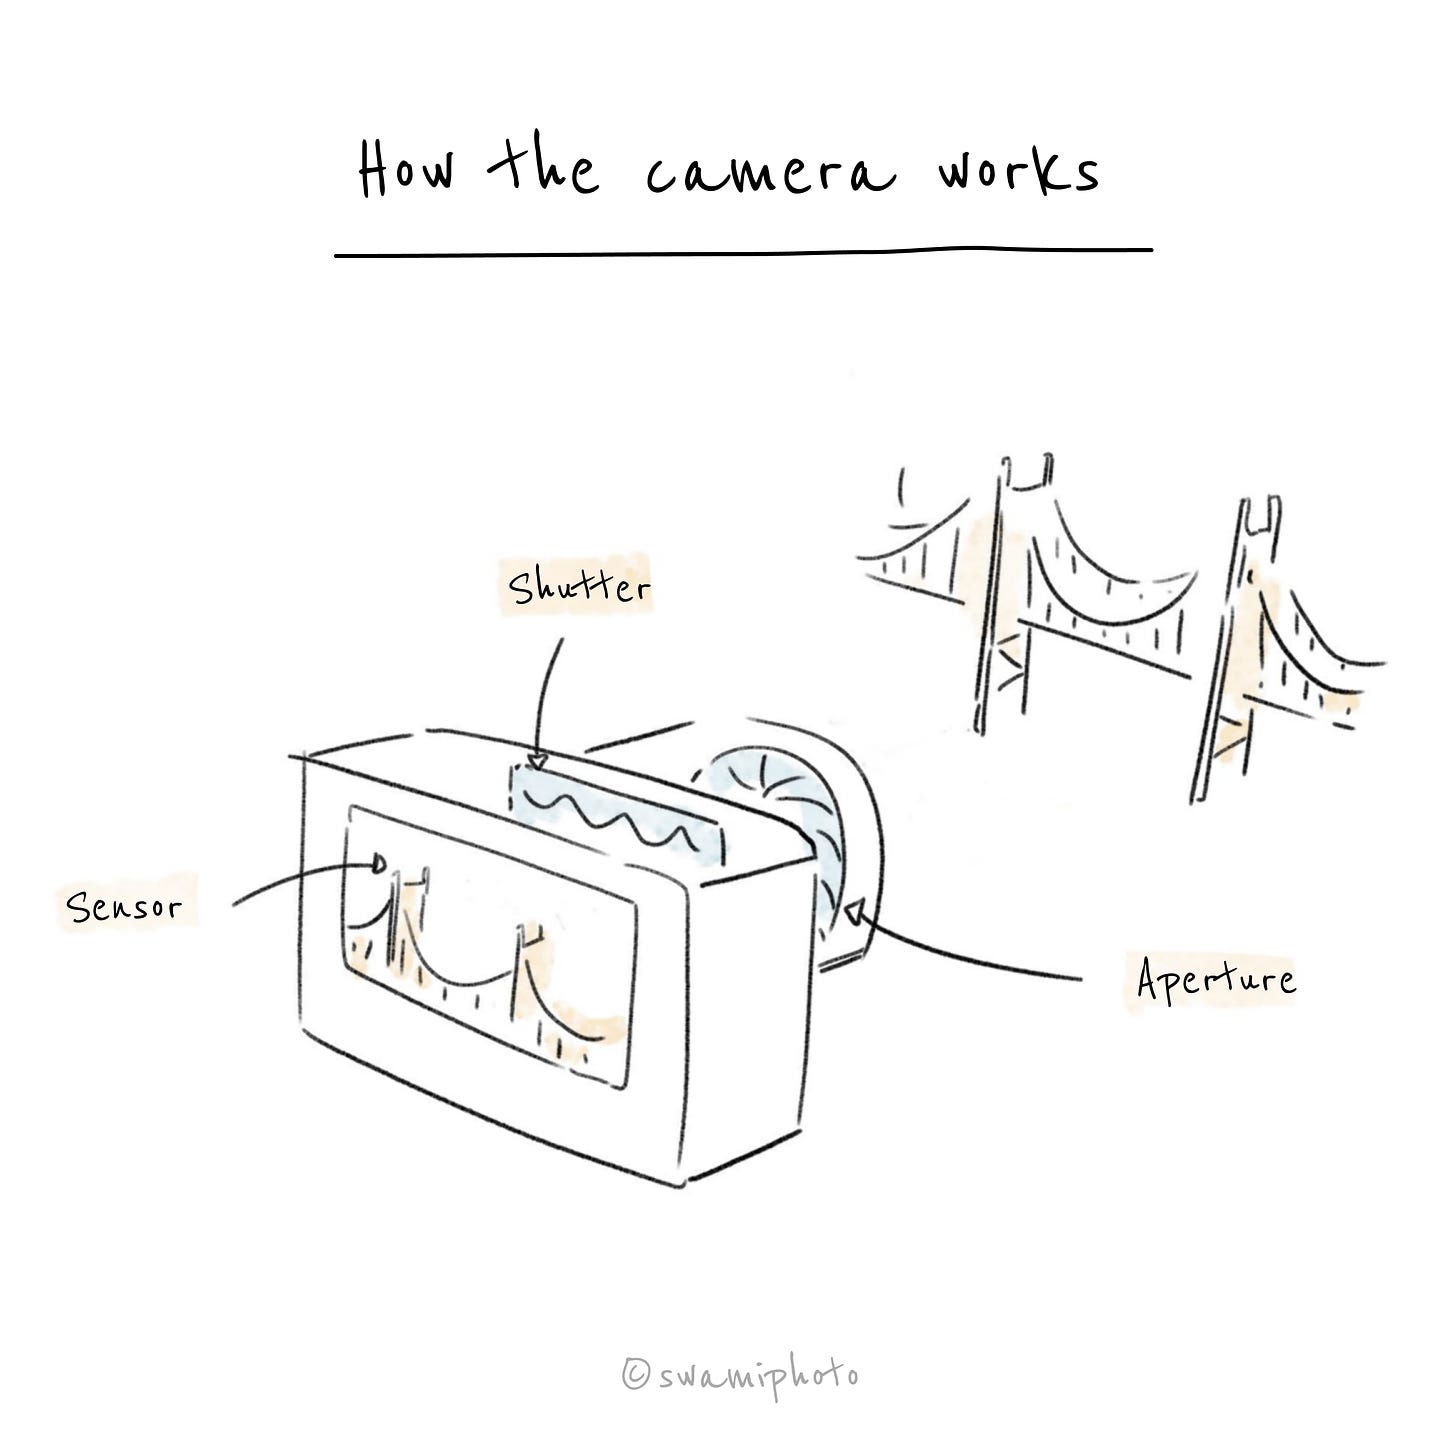 How the Camera Works